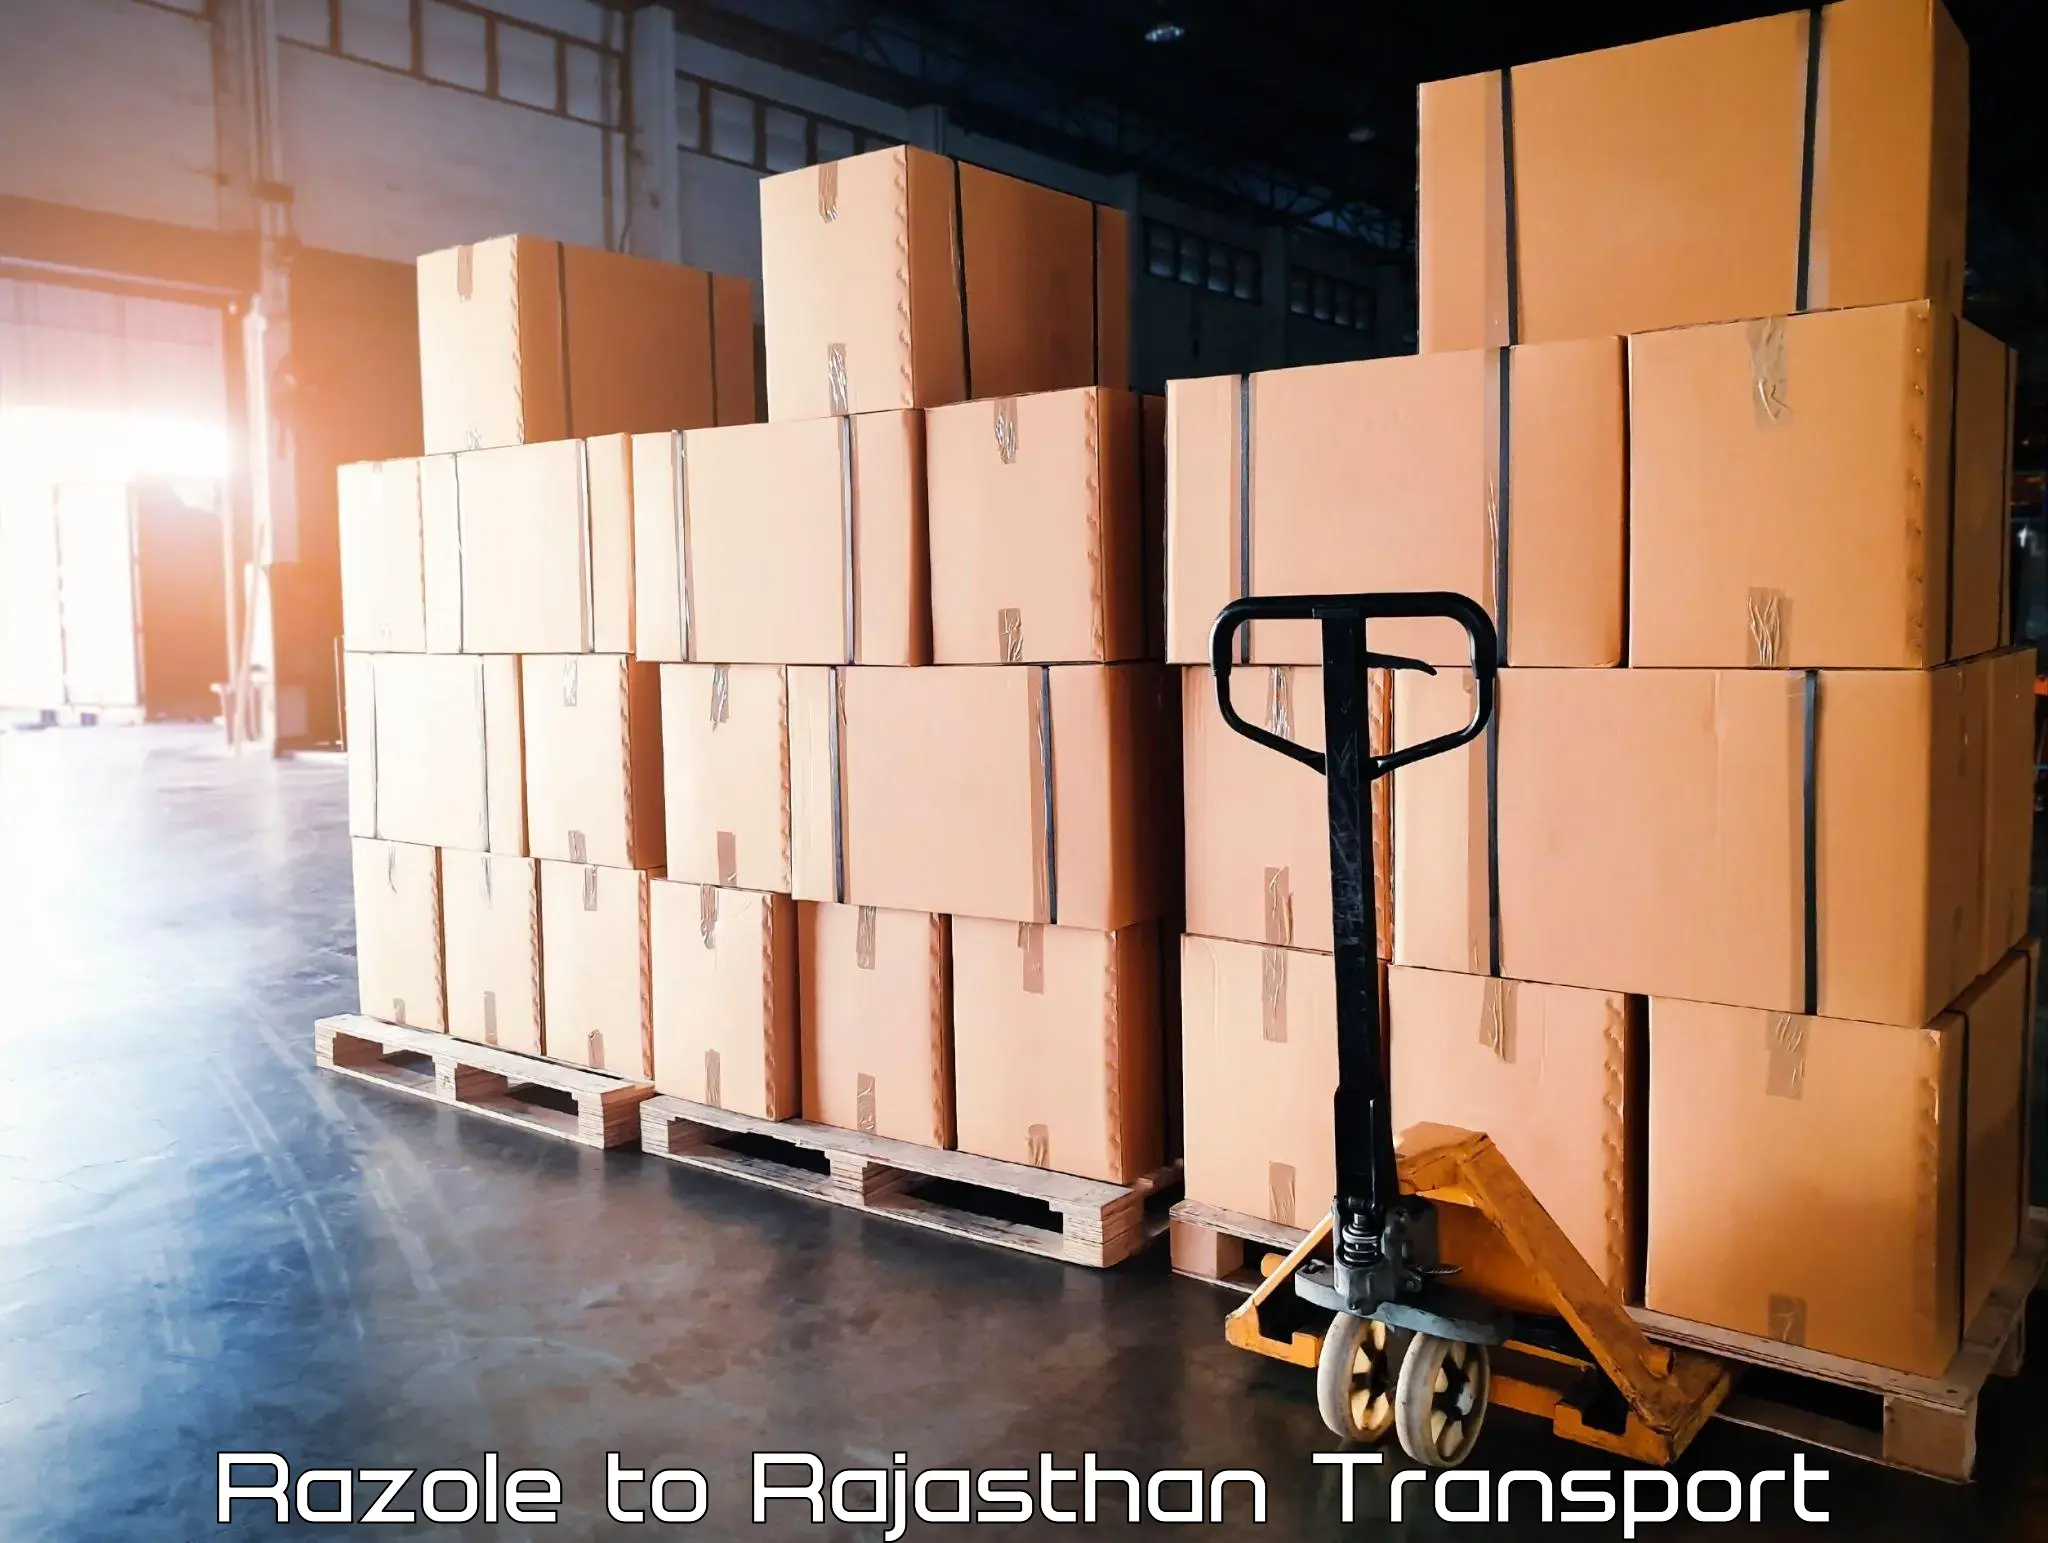 Cargo train transport services Razole to Piparcity